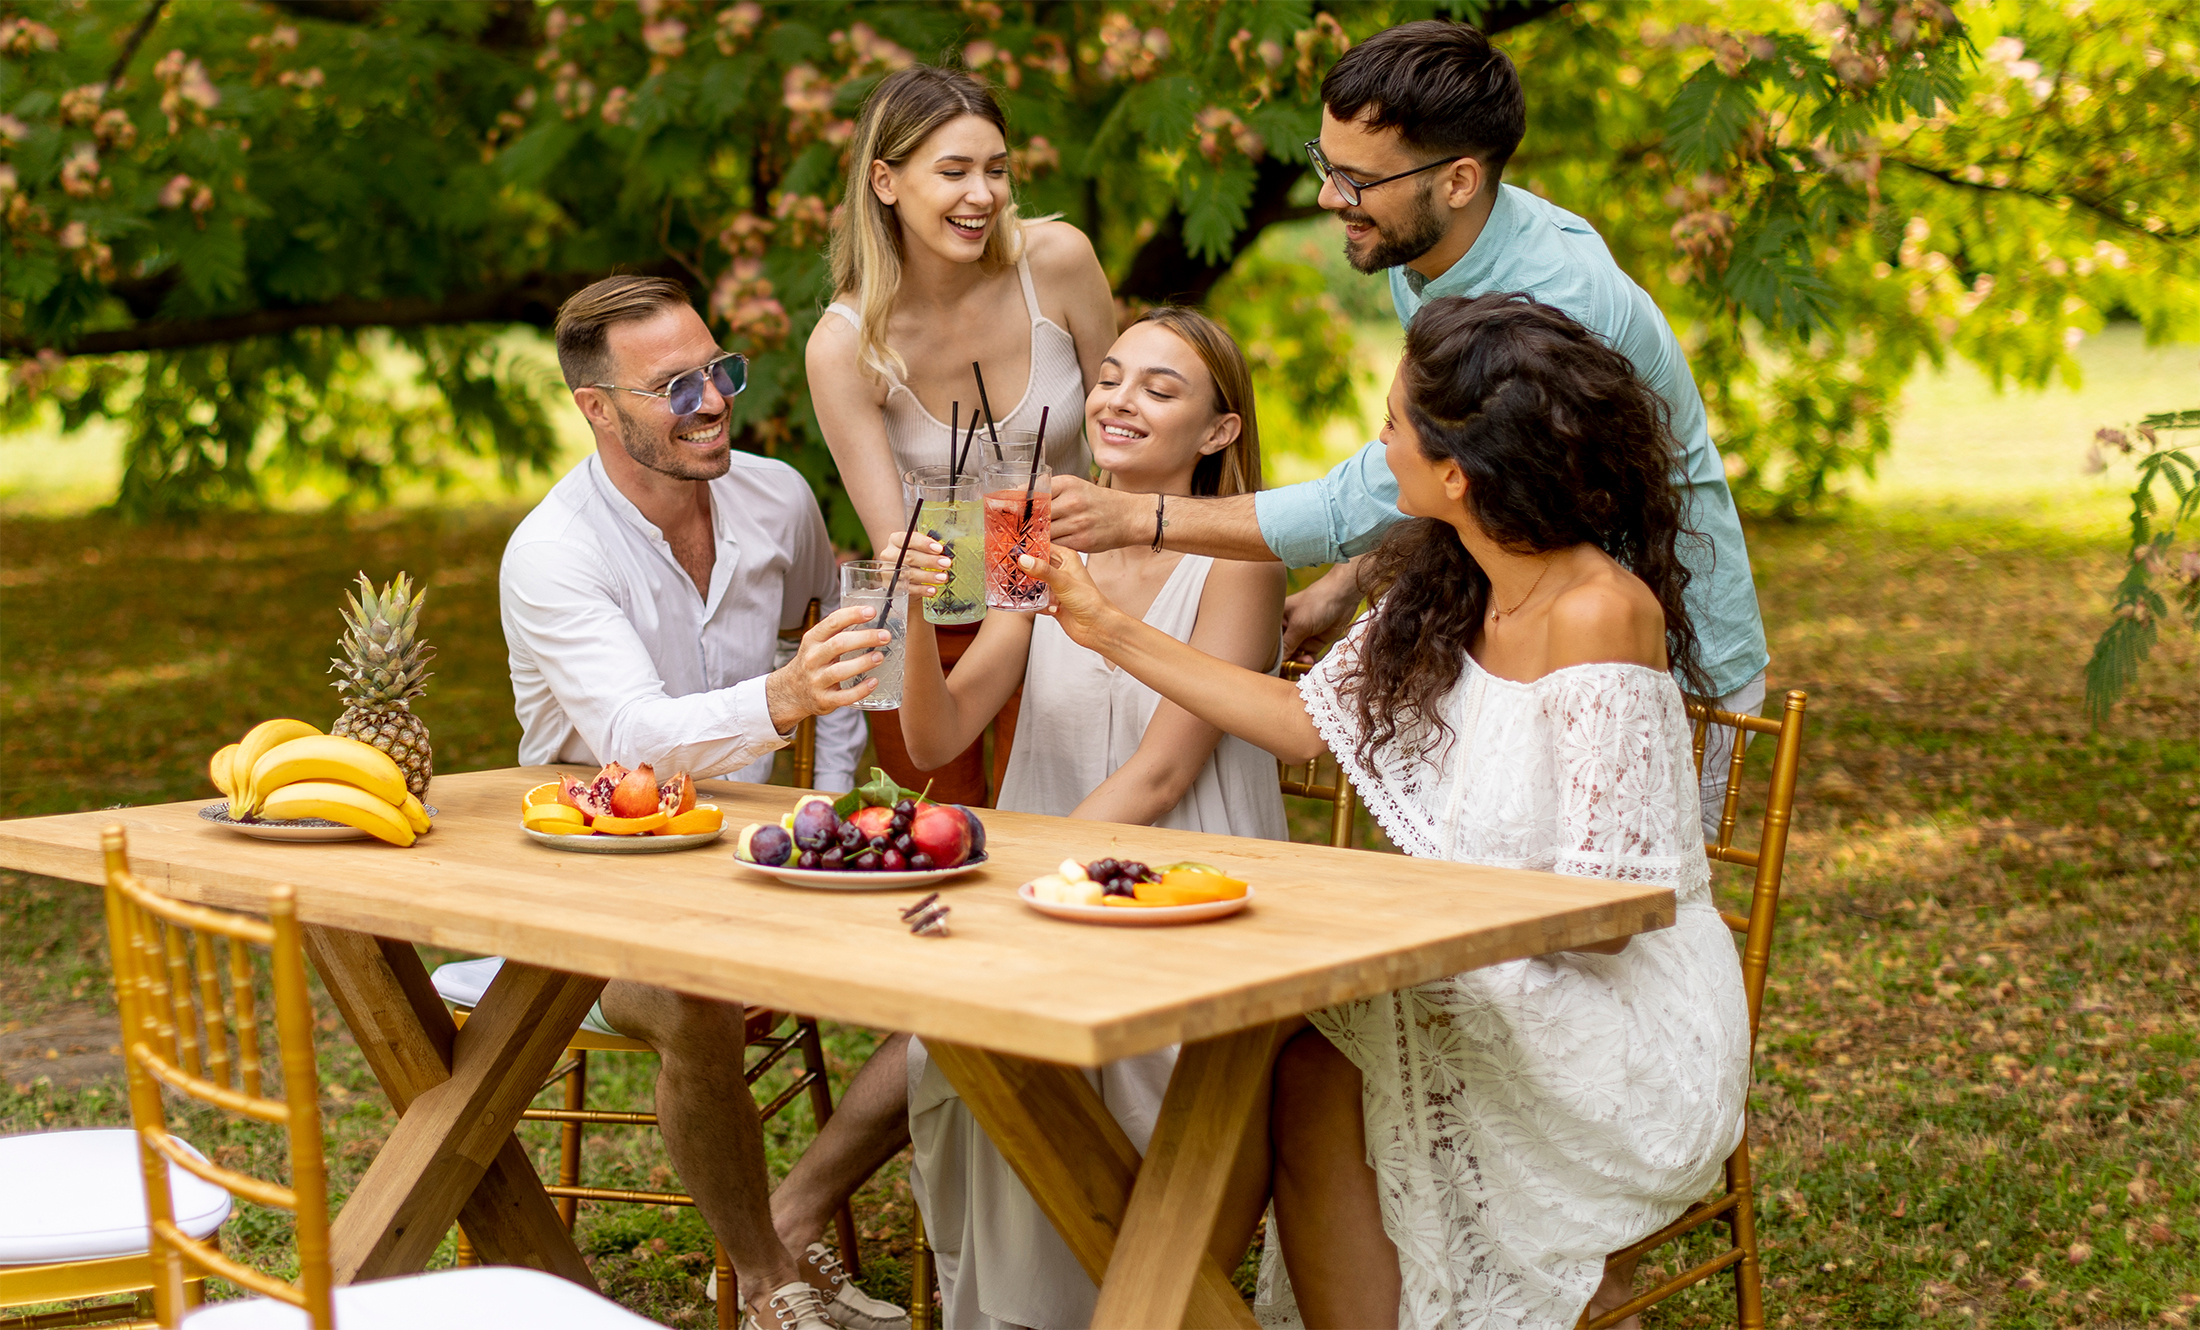 group-happy-young-people-cheering-with-fresh-lemonade-eating-fruits-garden